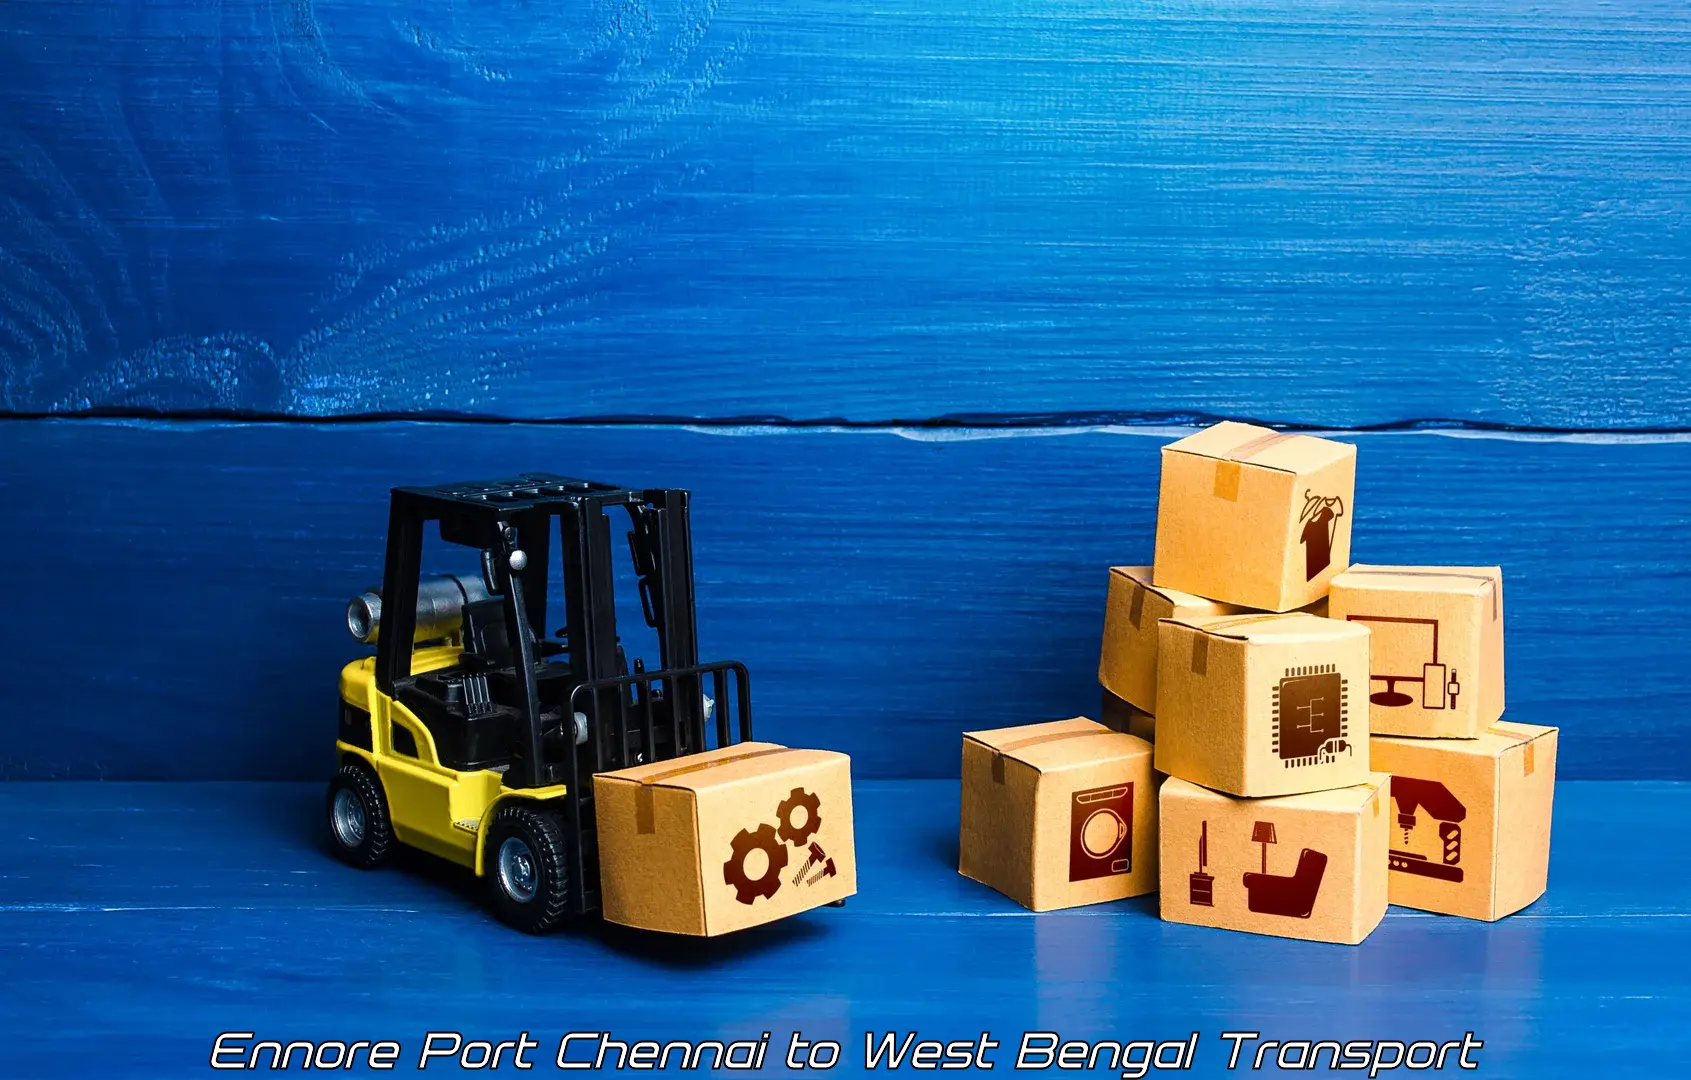 Goods delivery service Ennore Port Chennai to Kaliachak